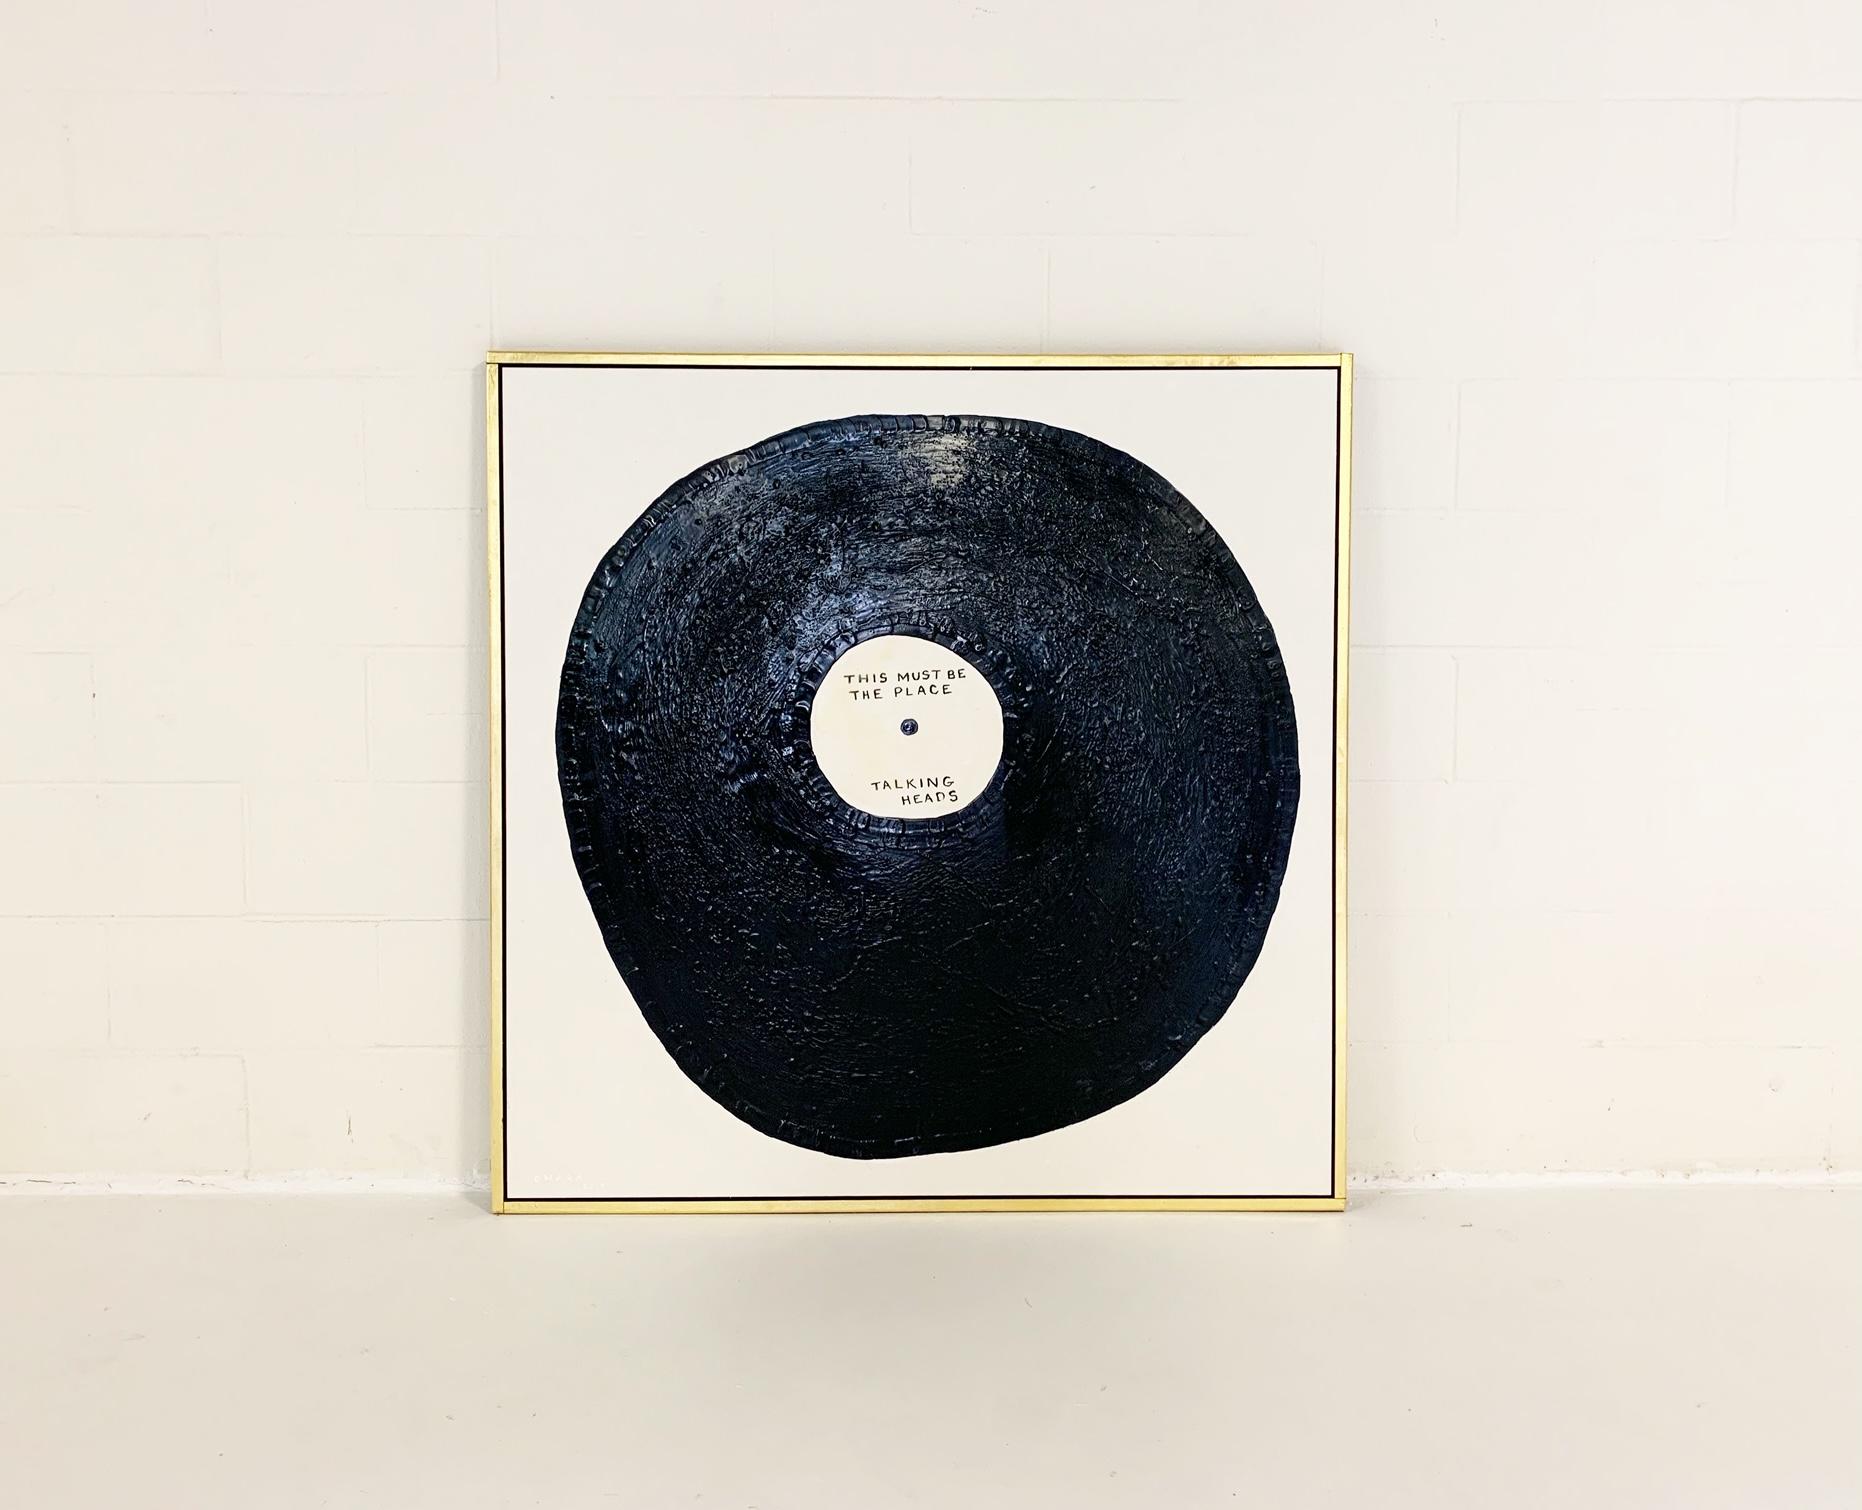 In Vinyl series. Forsyth is proud to represent John O’Hara, a self-taught artist from Saint Louis whose work is found in some of the most beautiful rooms on Earth. His large-scale paintings instantly create a cool environment in any design, large or